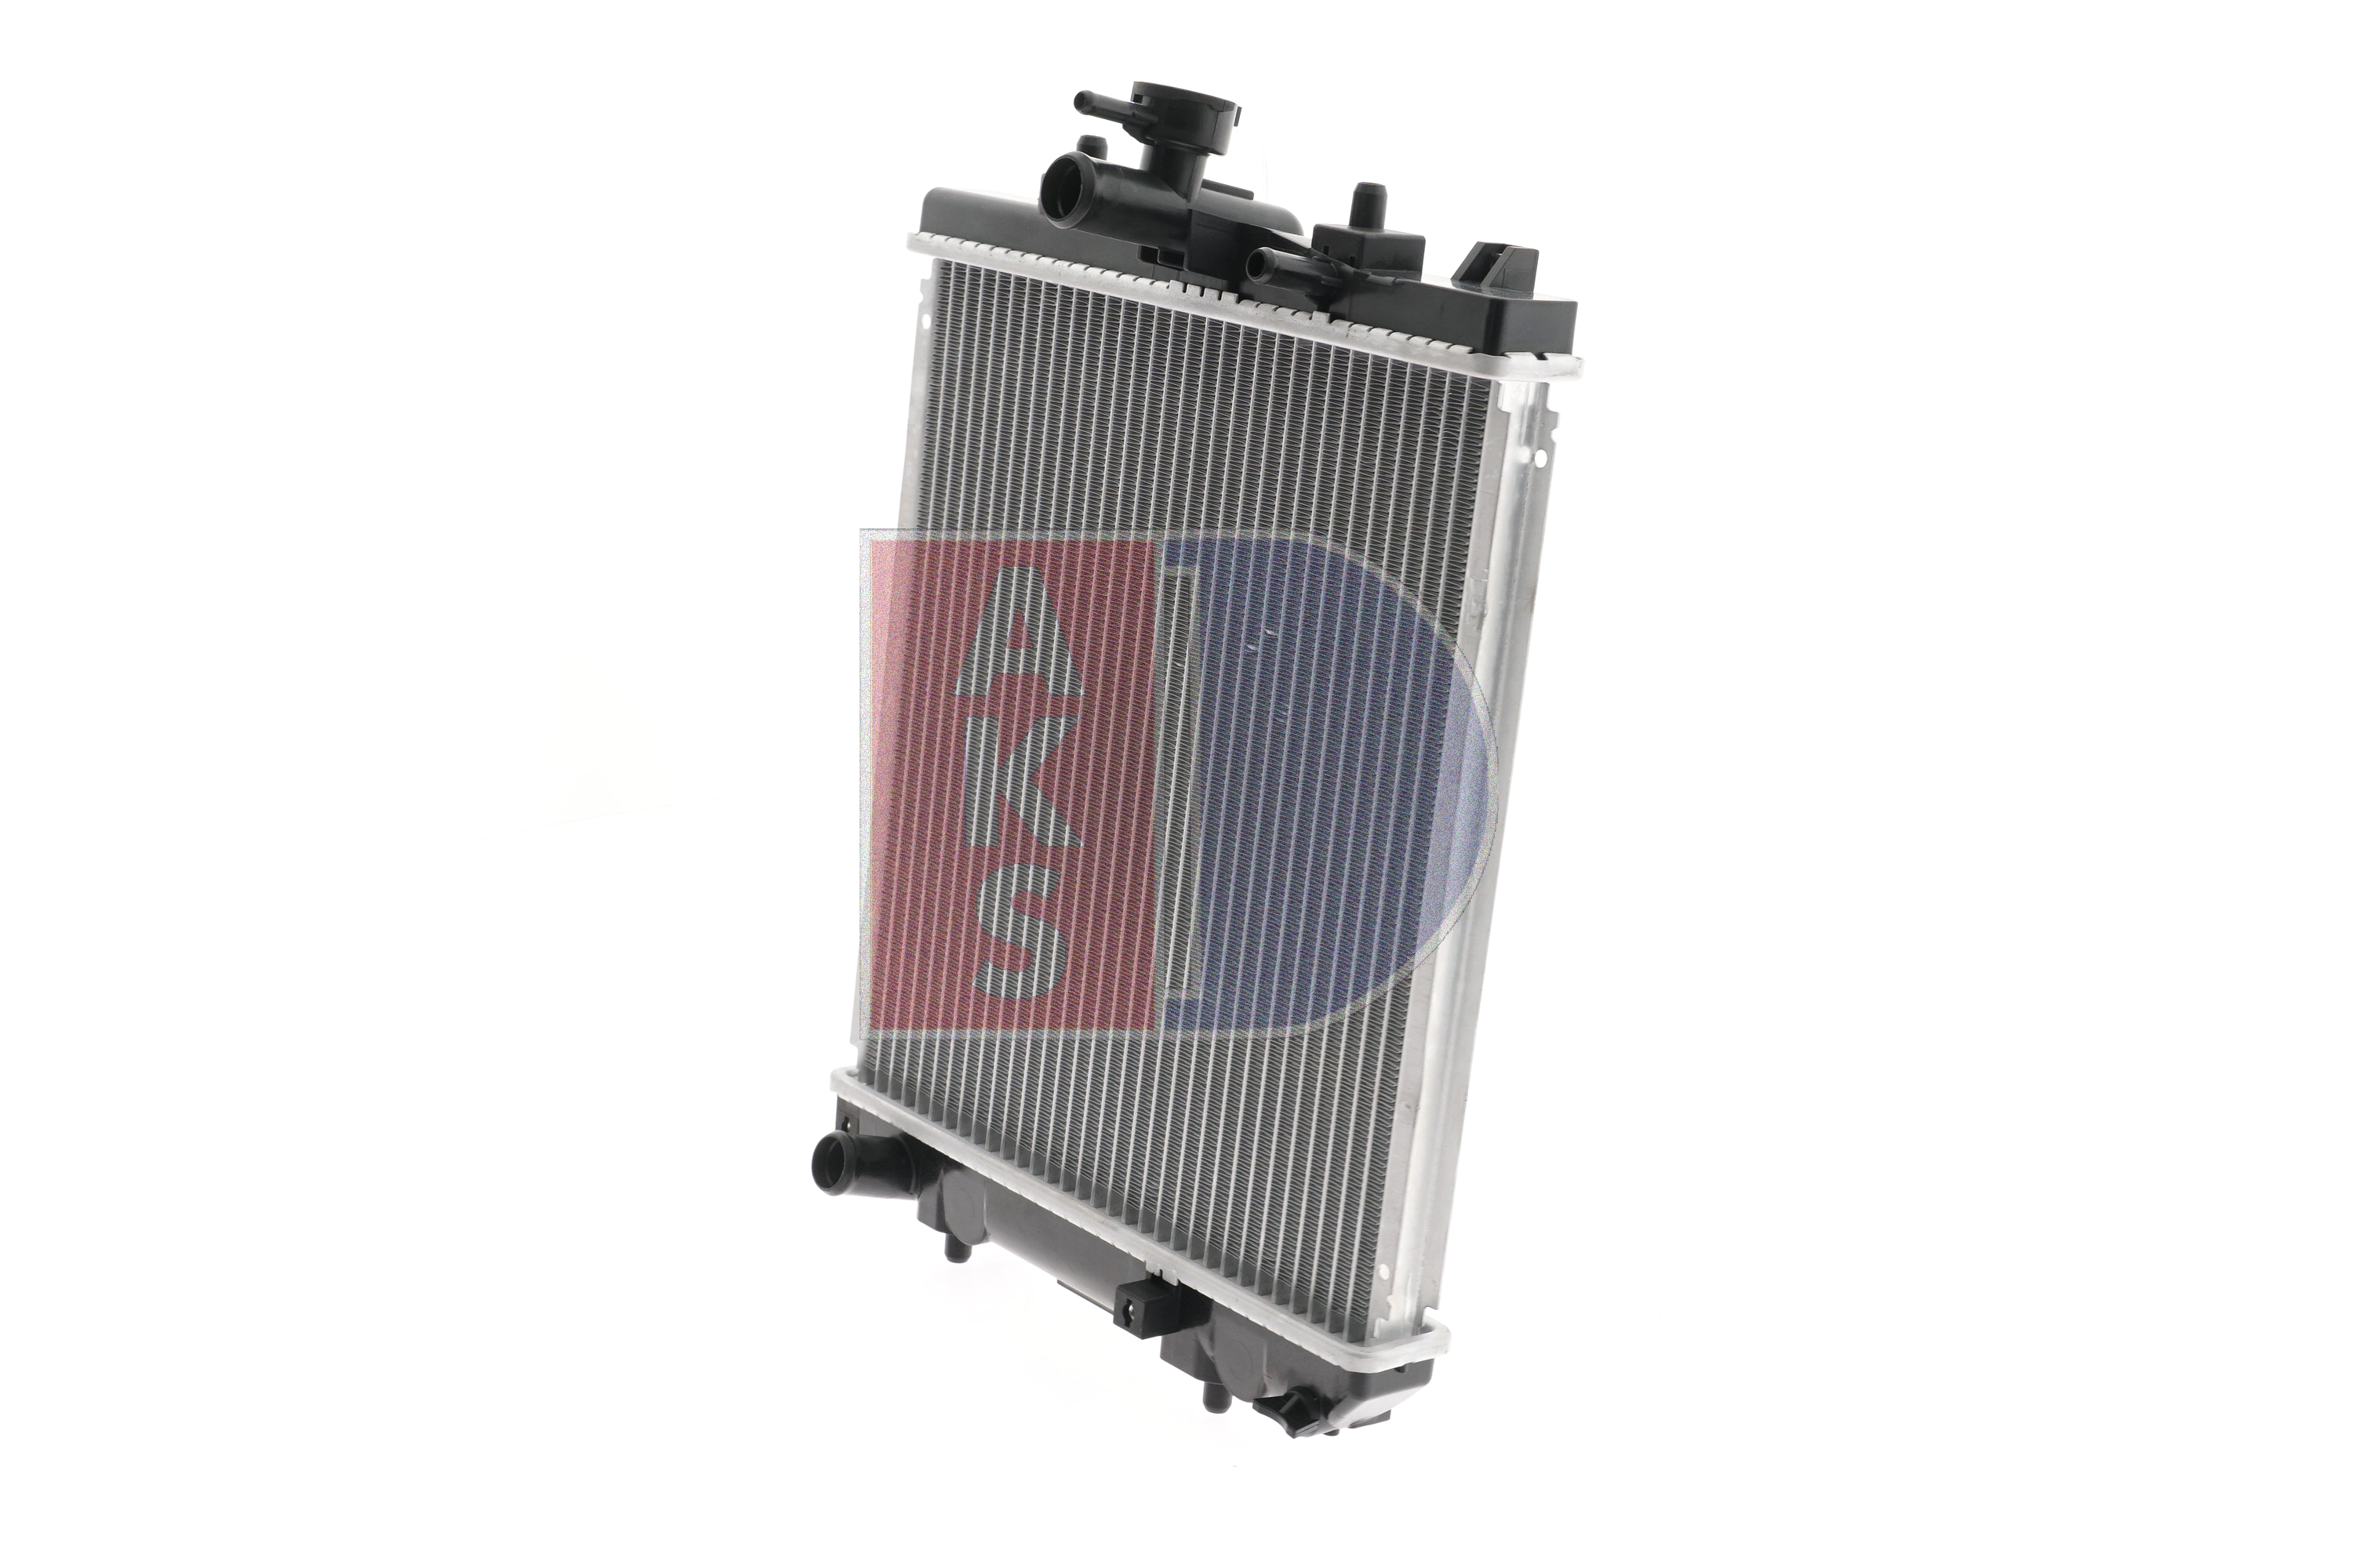 AKS DASIS 360035N Engine radiator Aluminium, for vehicles with/without air conditioning, 350 x 318 x 25 mm, Manual Transmission, Brazed cooling fins